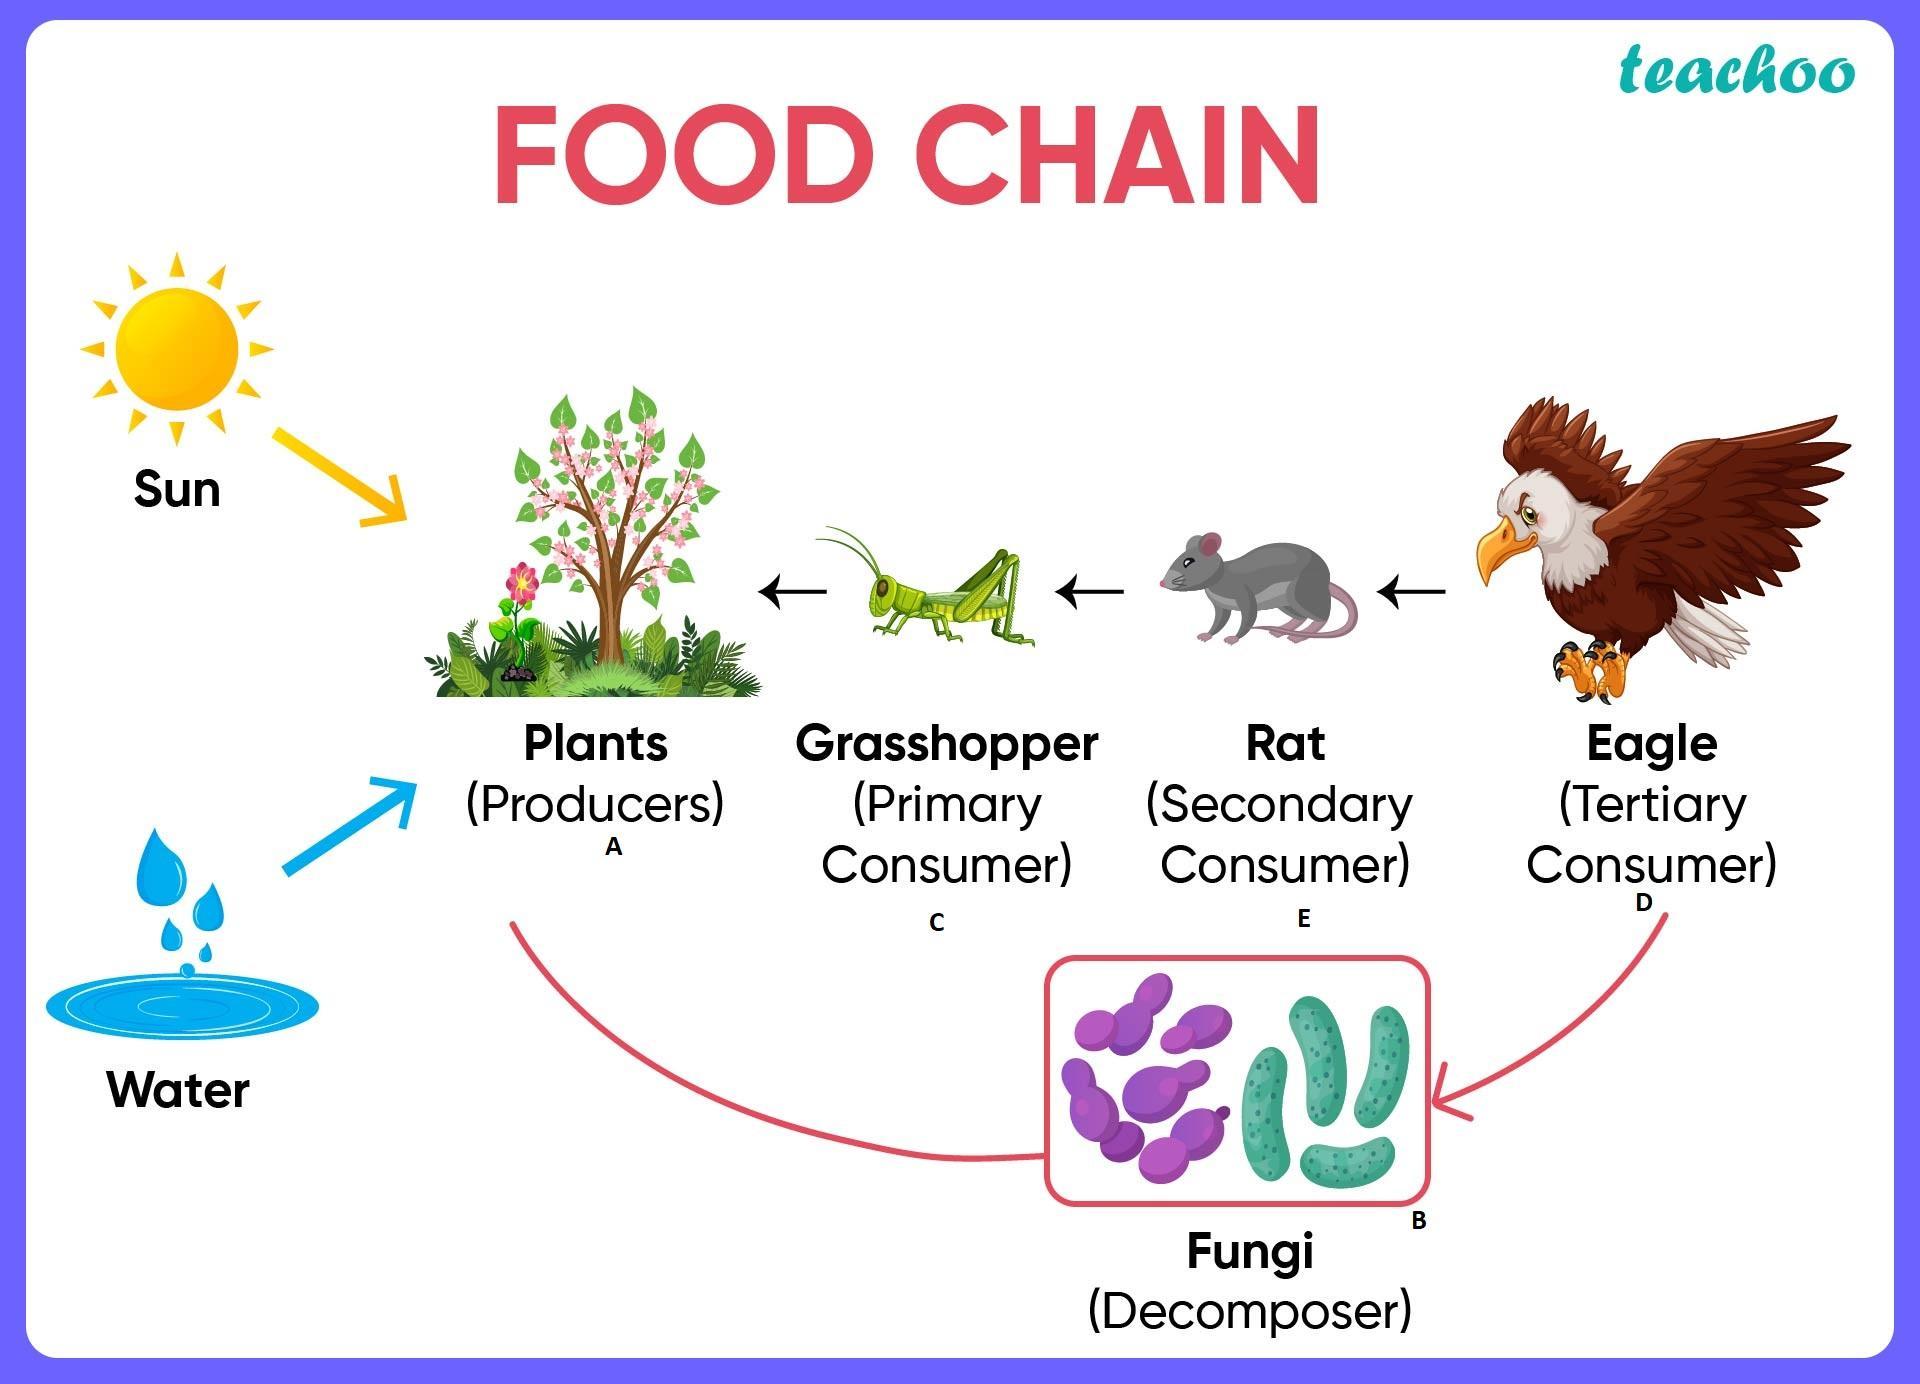 2. The Diagram Below Represents A Food Web Composed Of Producers, Consumers, Anddecomposers.ABDWhich